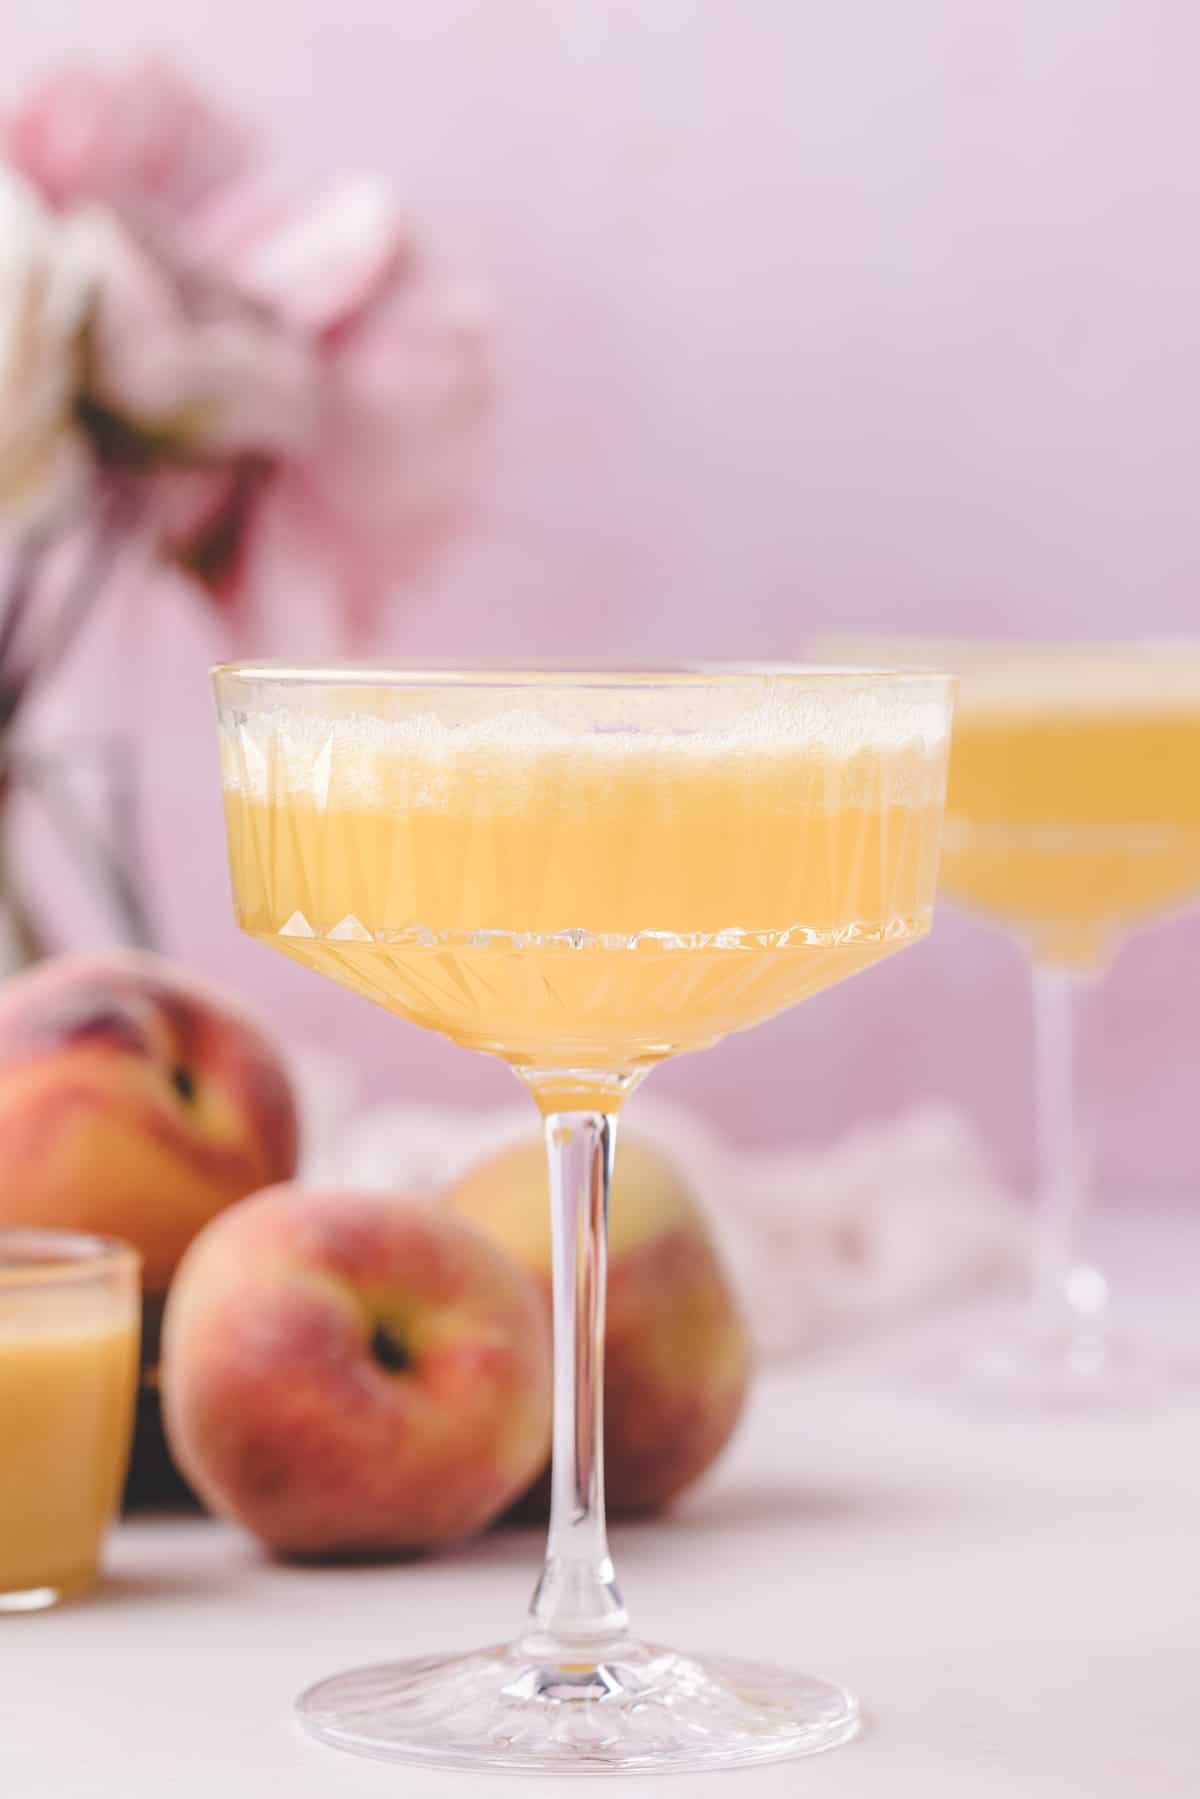 Peach Bellini cocktail against a pinkish purple background.